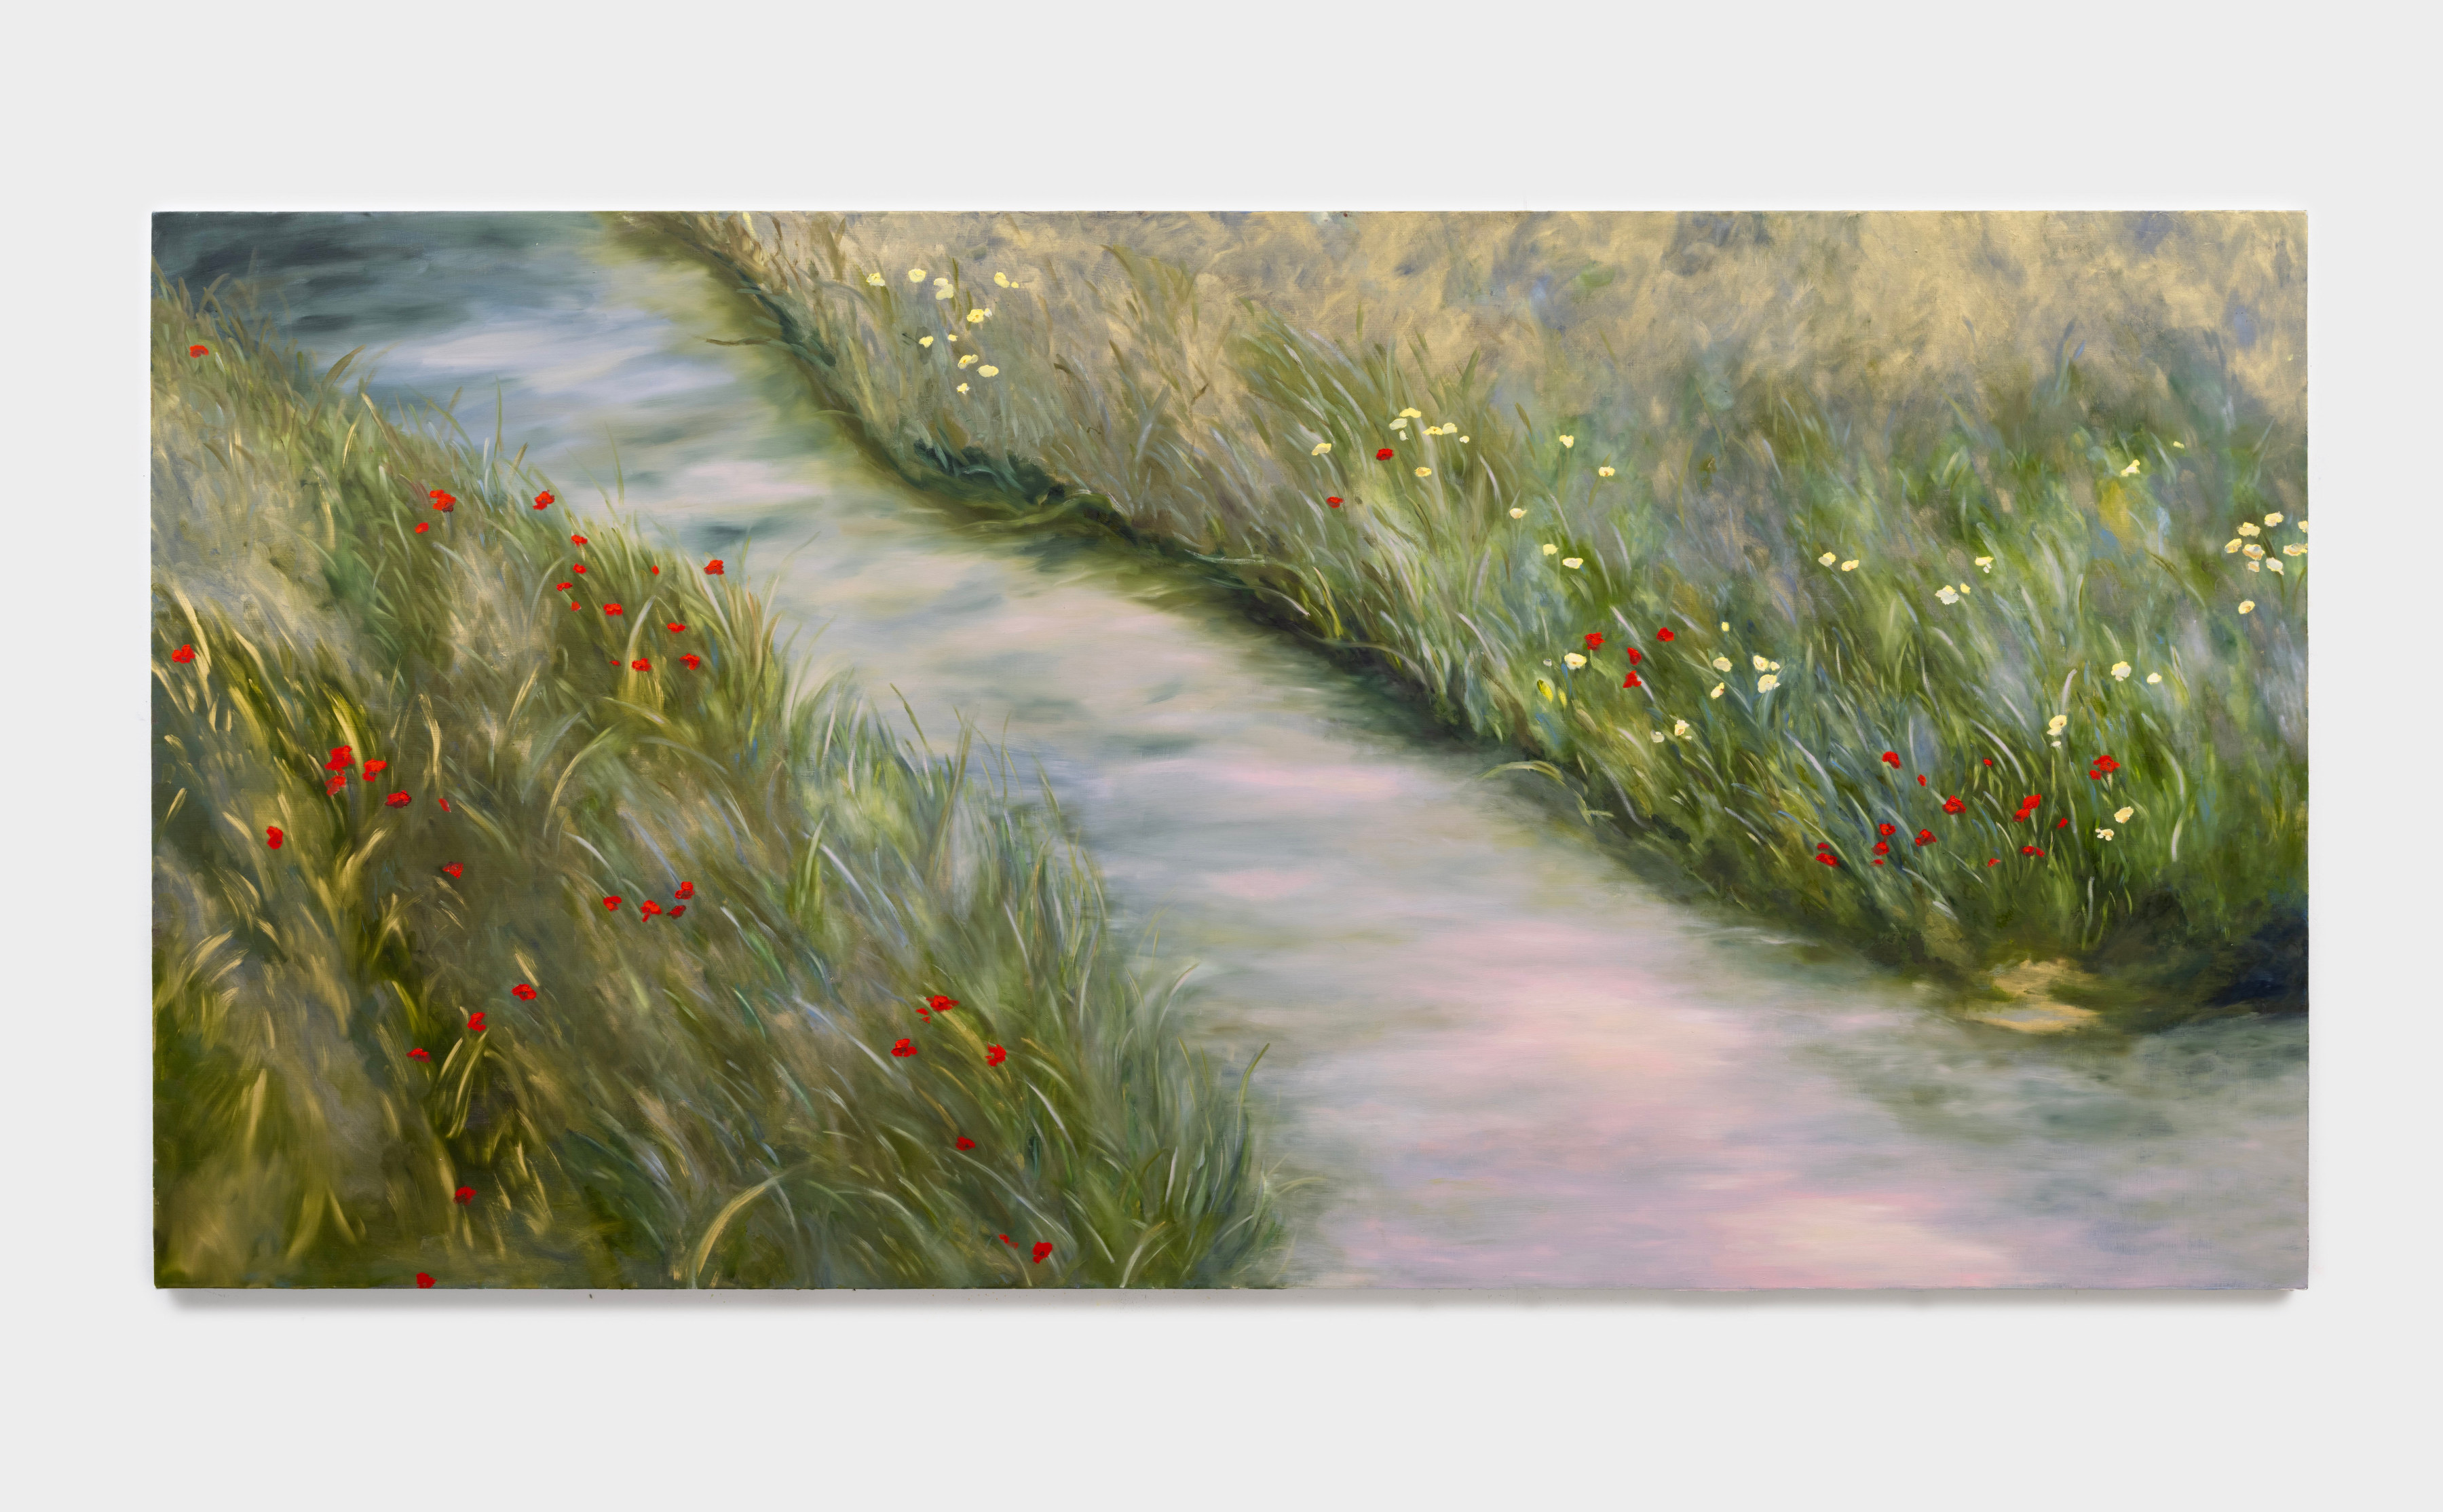 A painting of a pale green and lavender tinted stream running between banks of green grass with yellow and red flowers.